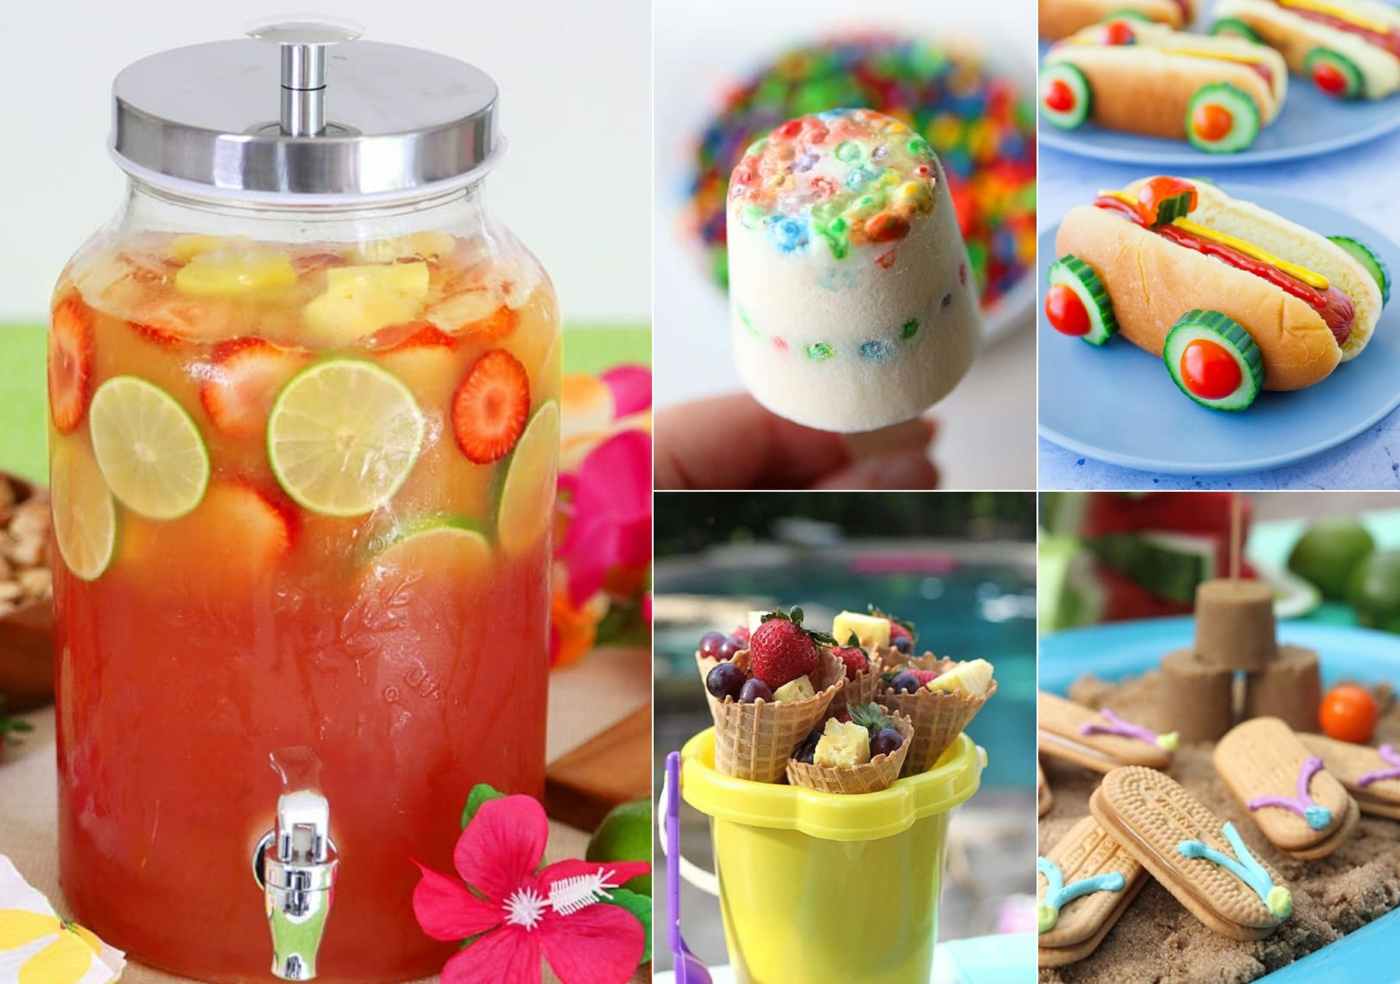 Set the kids' pool party to enjoy delicious snacks and drinks